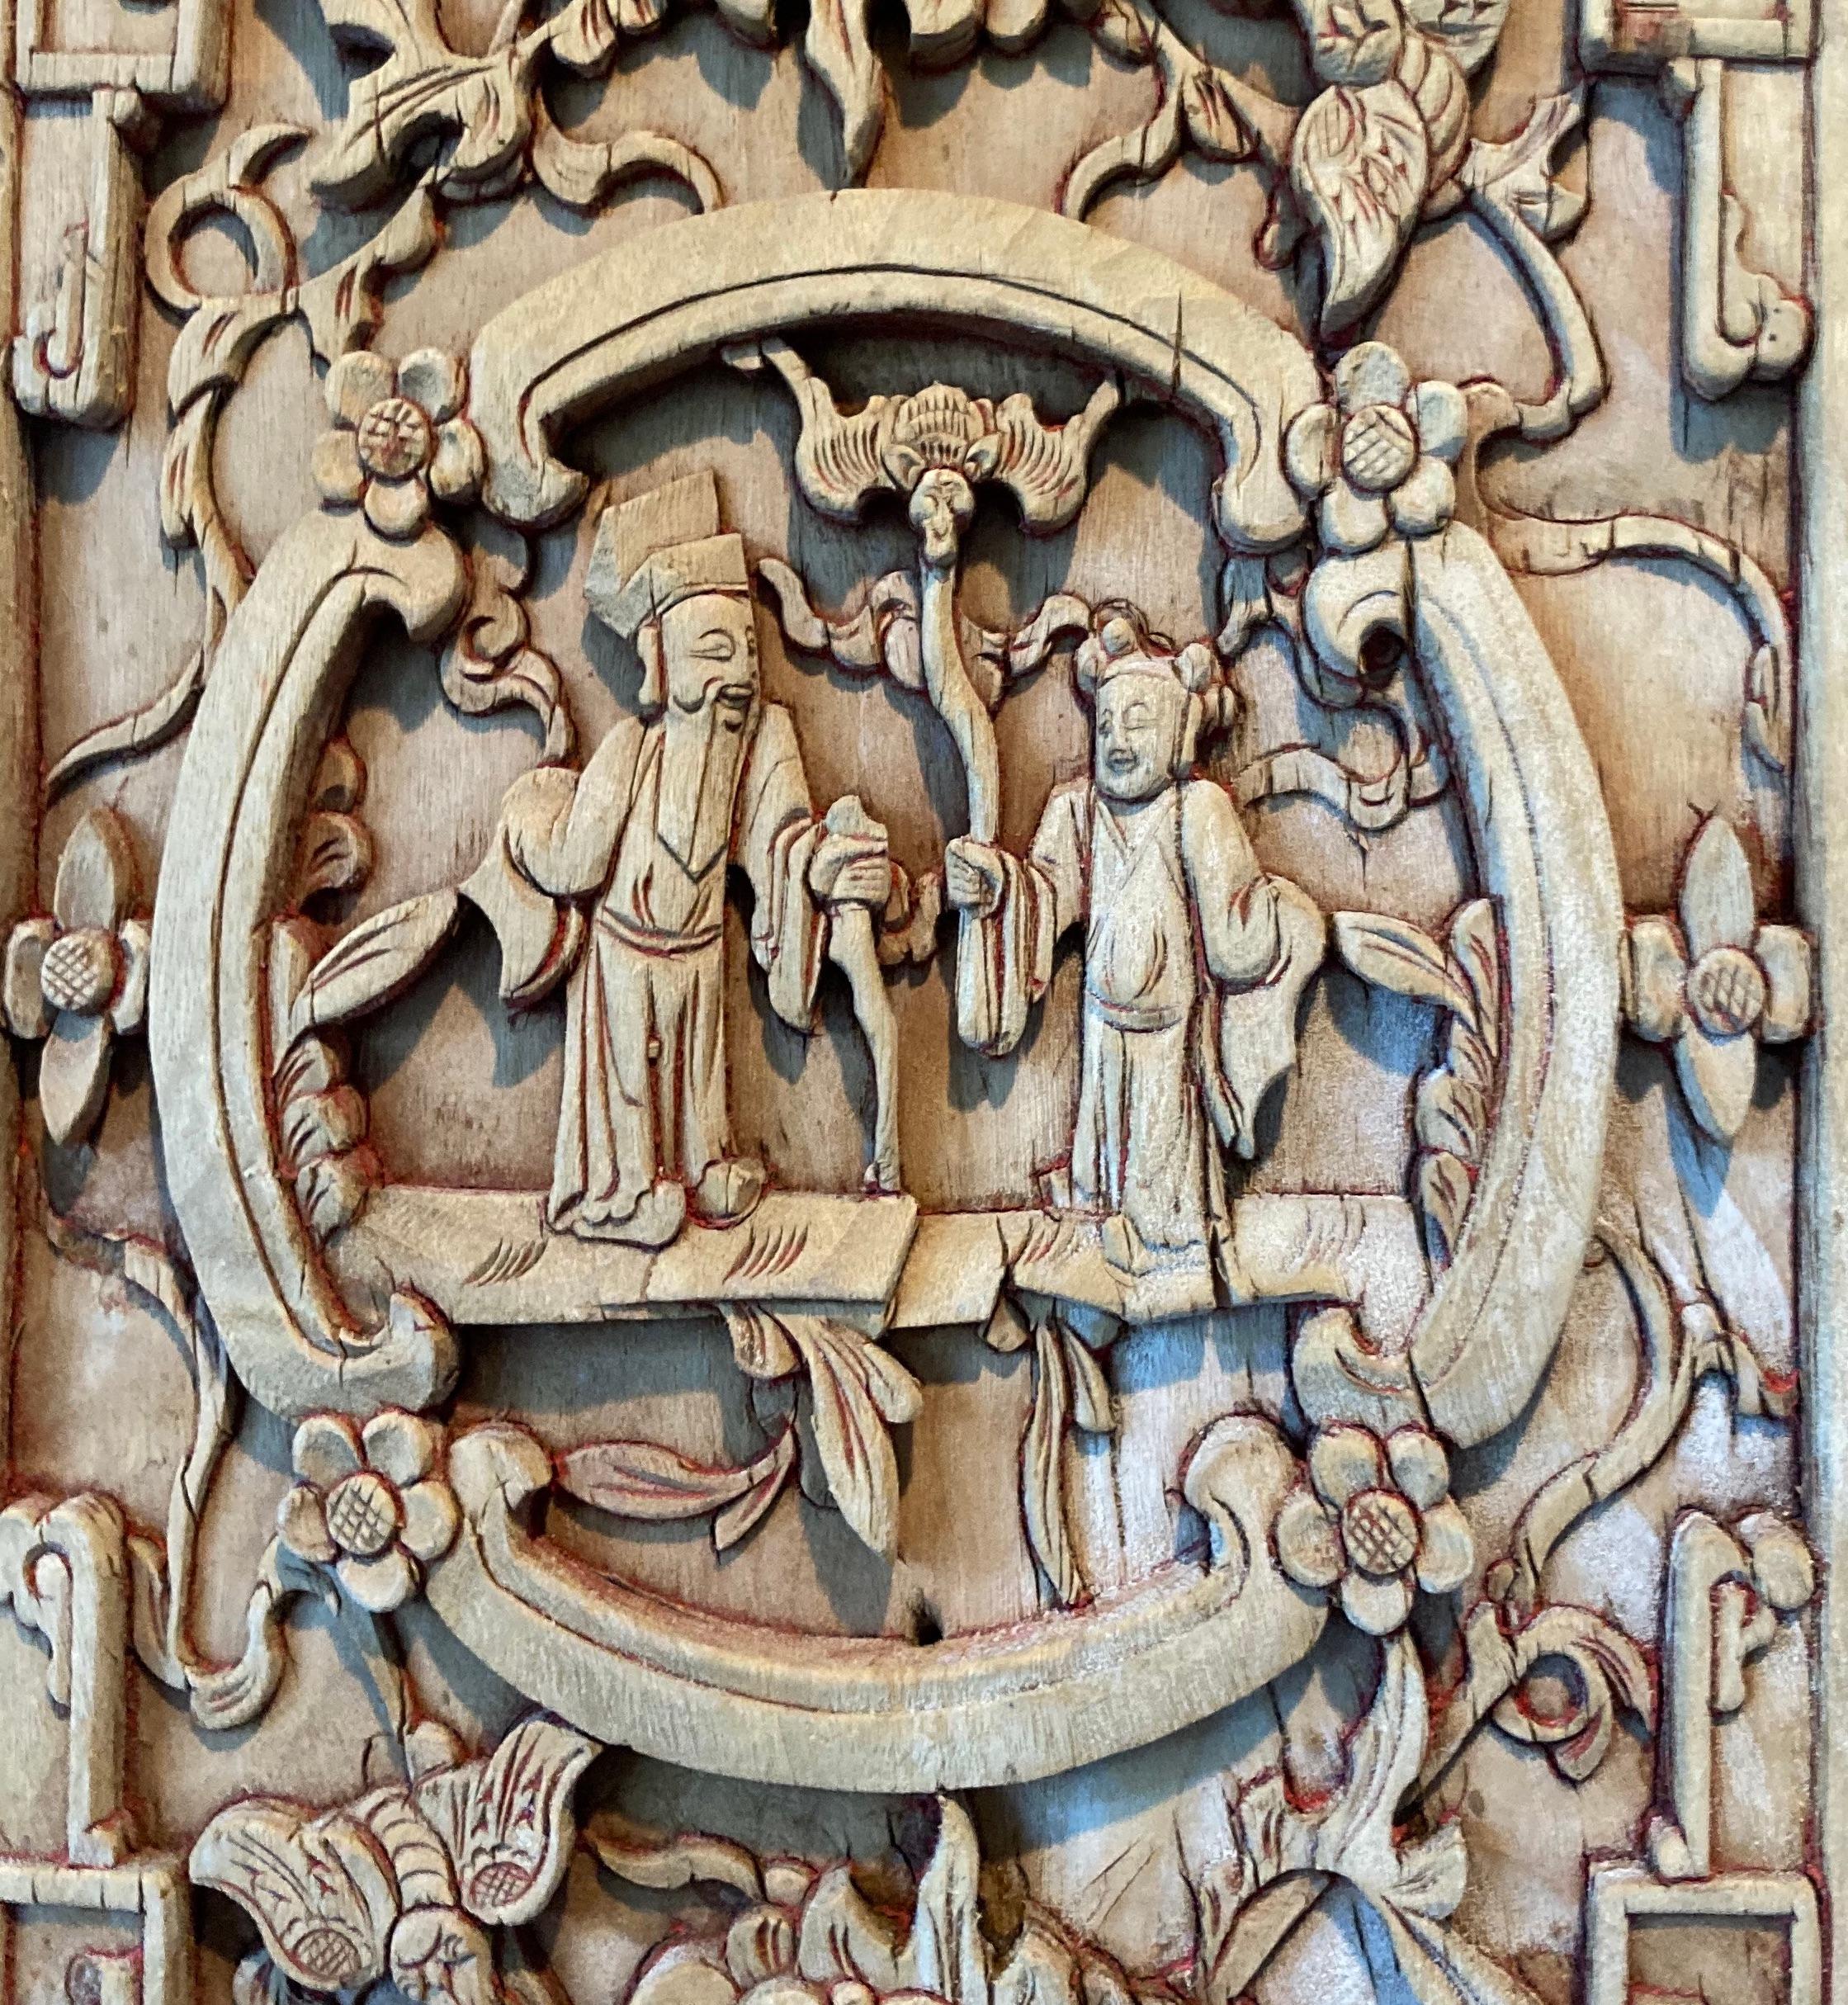 Framed panel with mitered mortise and tenon joints. Panels include four panes, mostly with relief carvings. Panes include circular carvings with personage, beast and floral motifs.